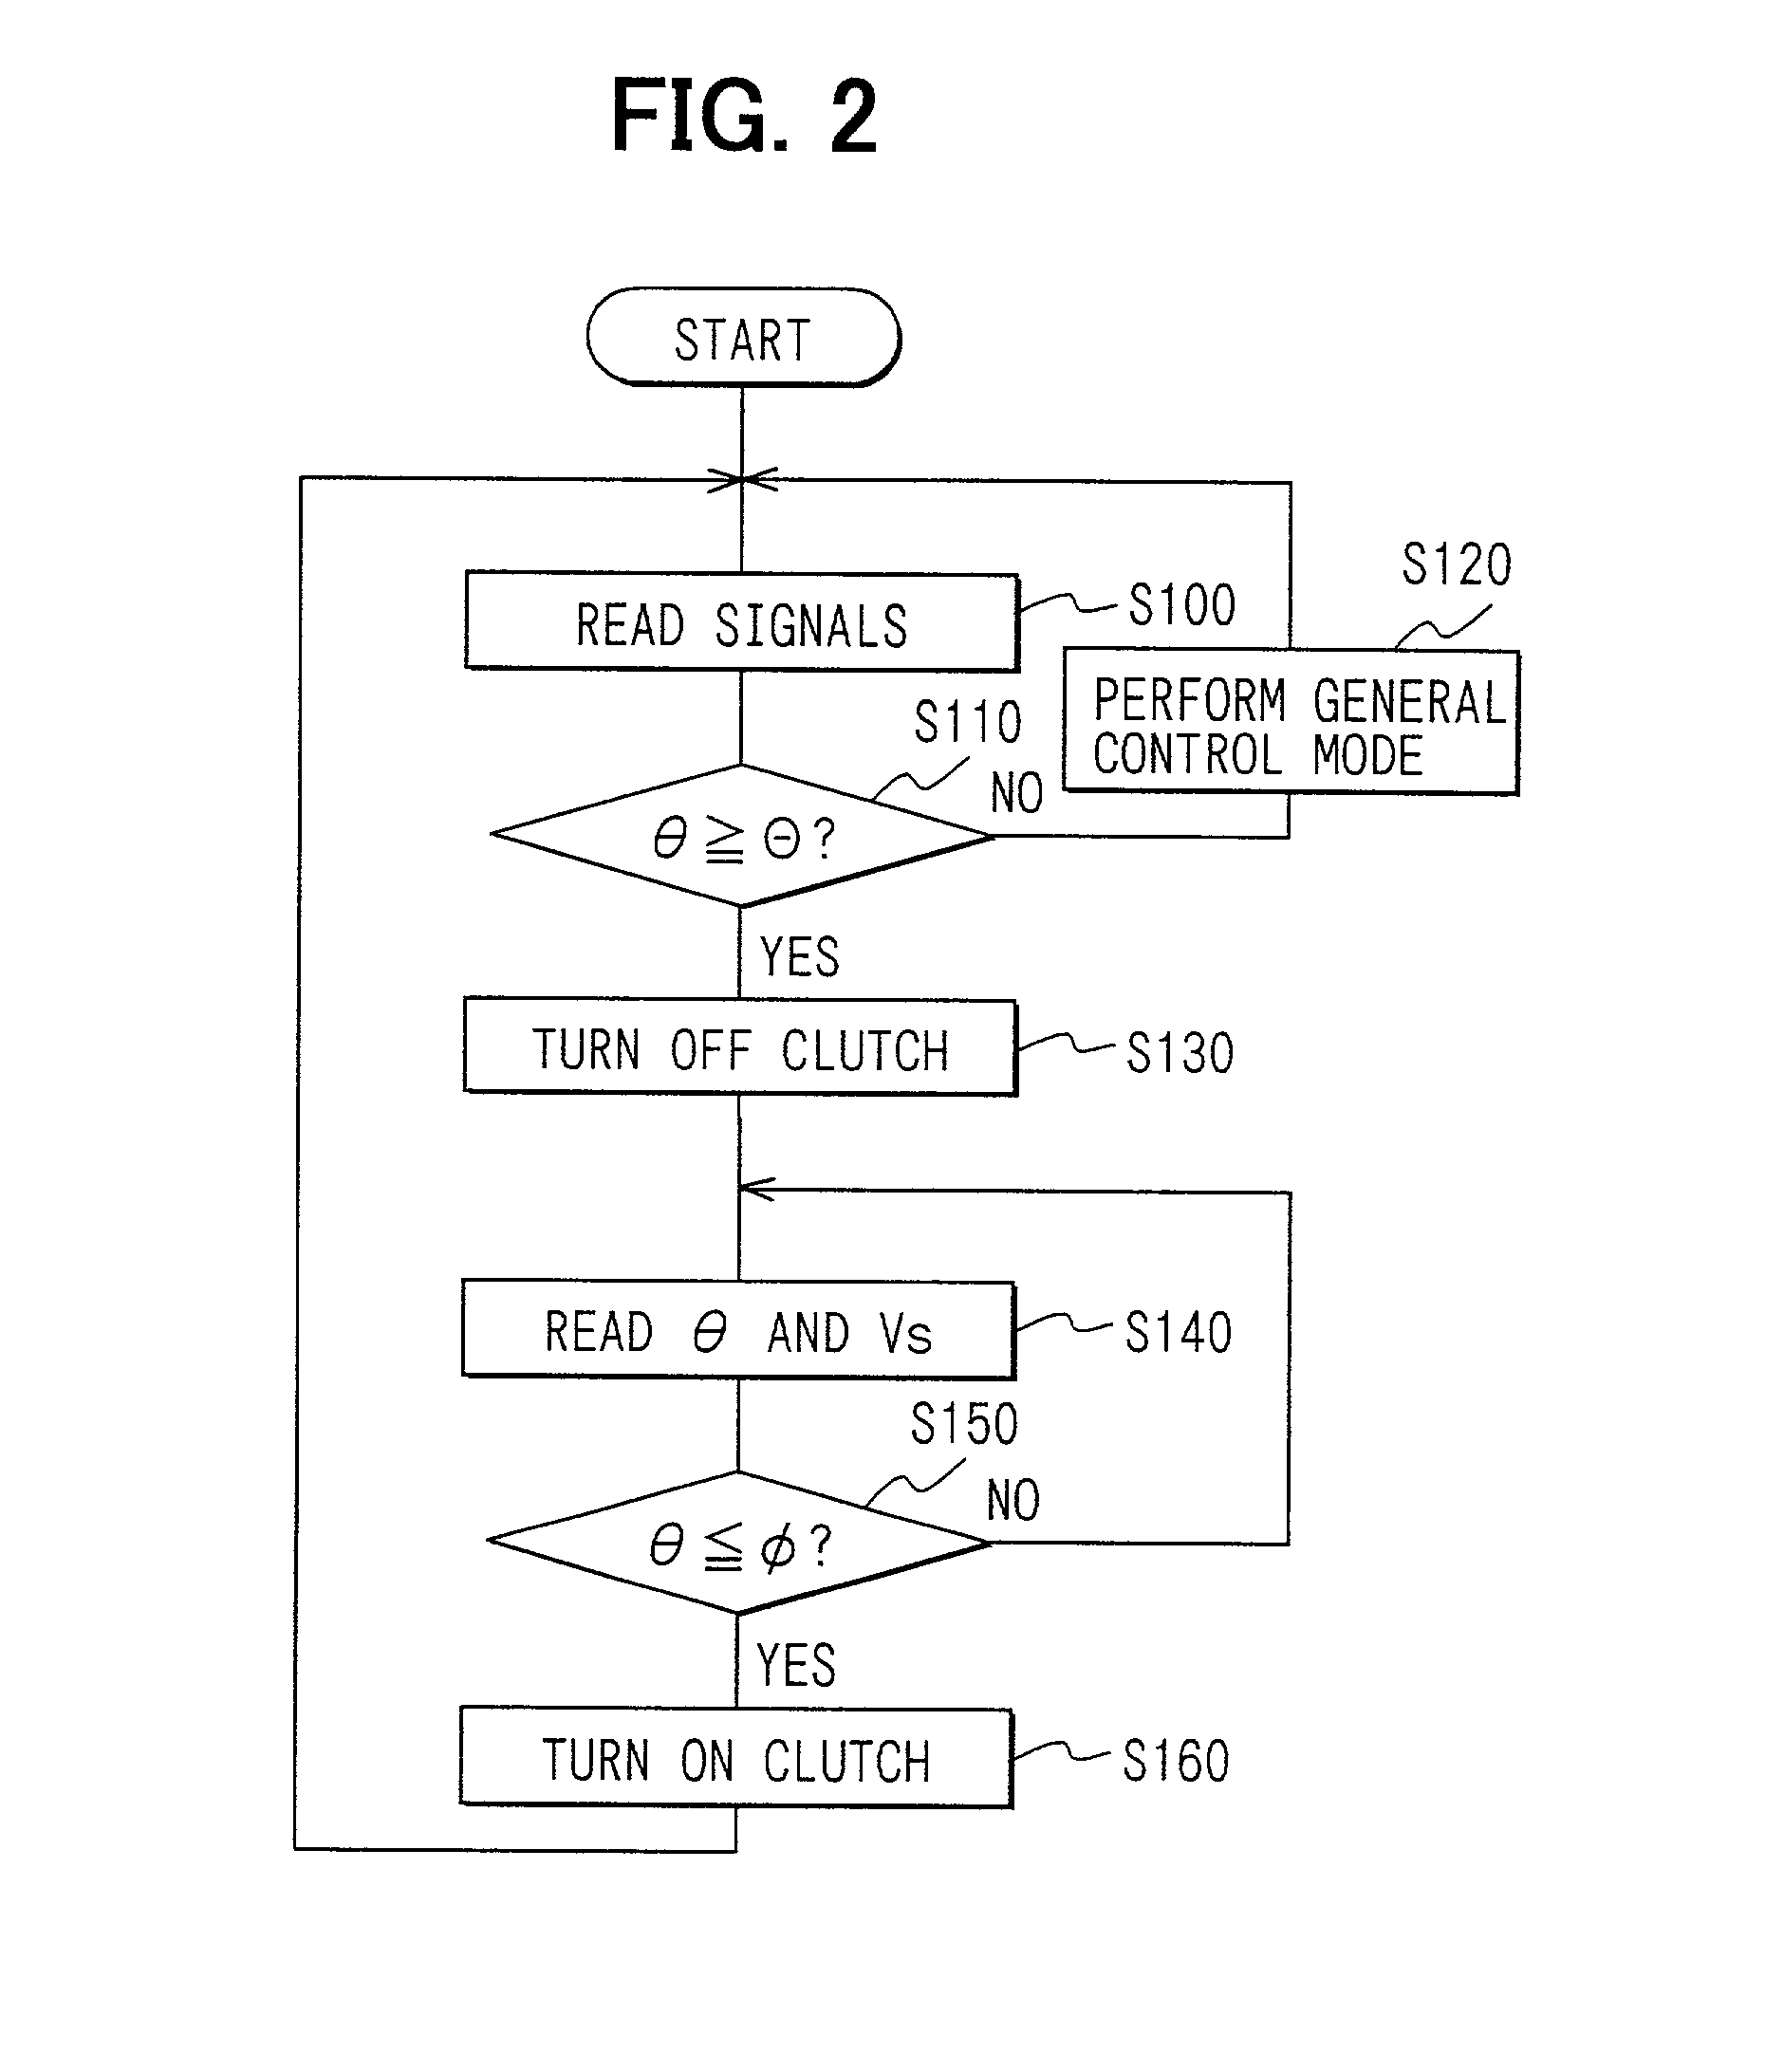 Vapor-compression refrigerant cycle for vehicle